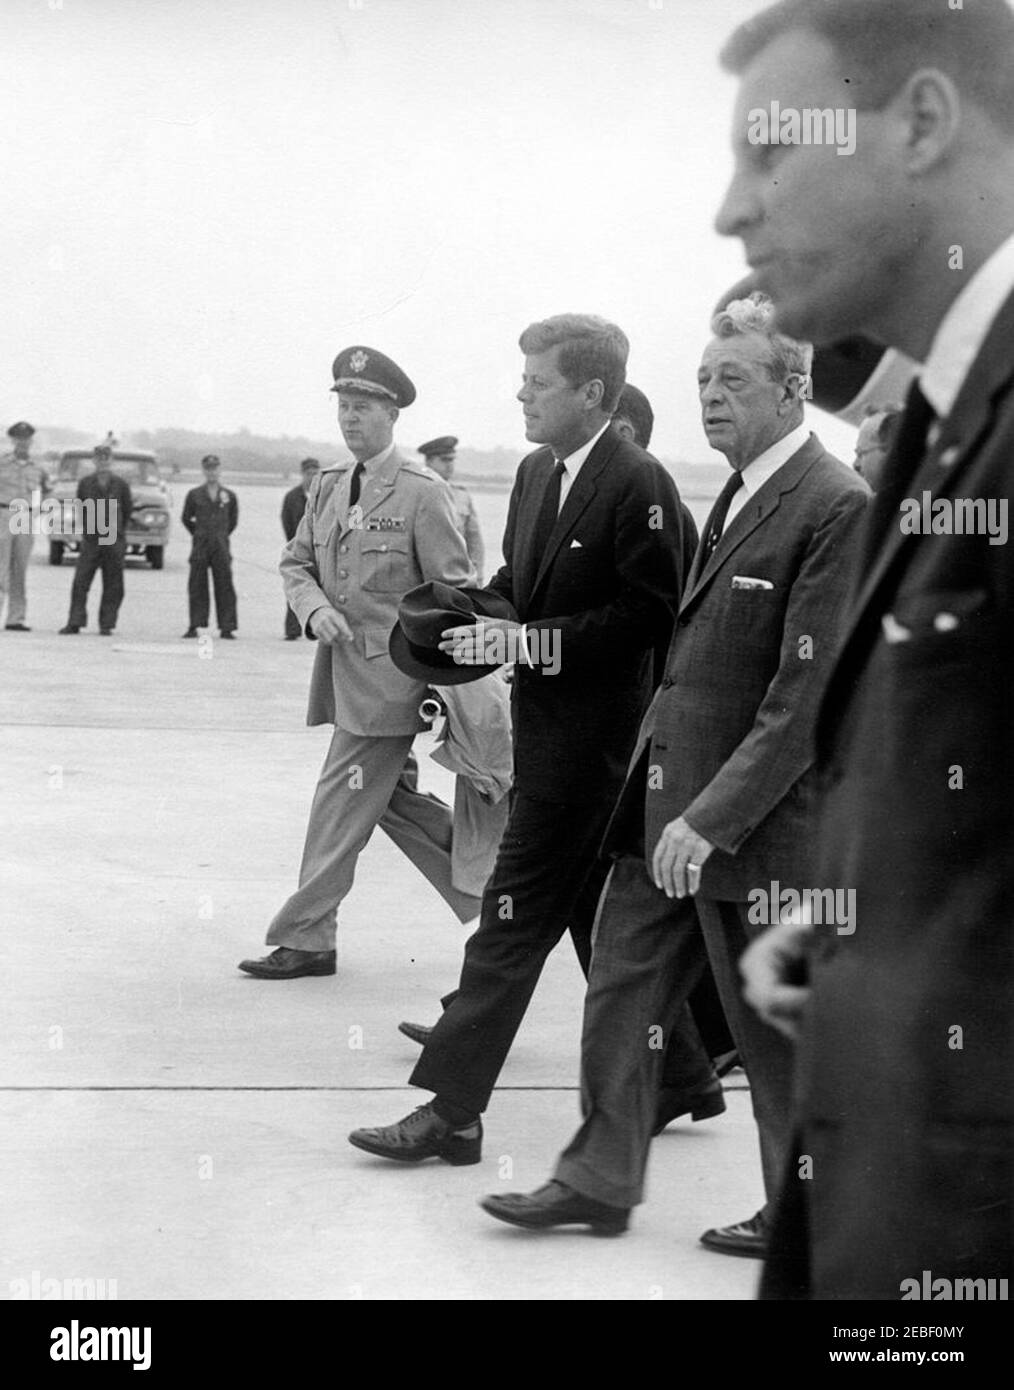 Arrival of President Kennedy at Andrews Air Force Base upon his return from Europe, 9:30AM. Arrival of President John F. Kennedy at Andrews Air Force Base in Maryland upon his return from Europe. (L-R) Military Aide to the President General Chester V. Clifton; President Kennedy (holding a hat); Senator Everett Dirksen (Illinois); White House Secret Service agent H. Stuart u0022Stuu0022 Knight. Stock Photo